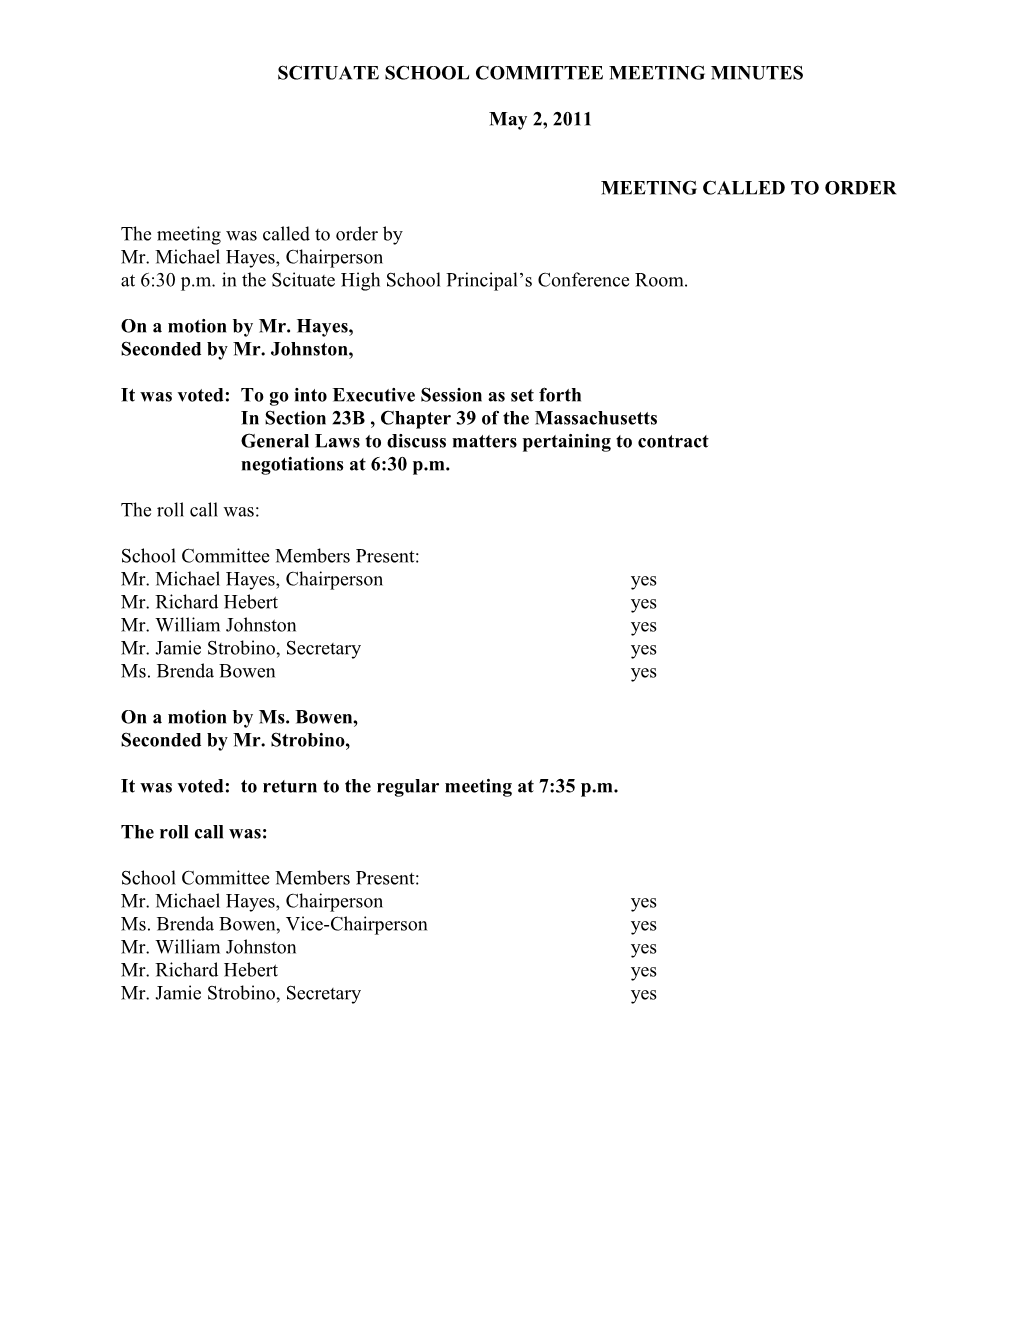 Scituate School Committee Meeting Minutes